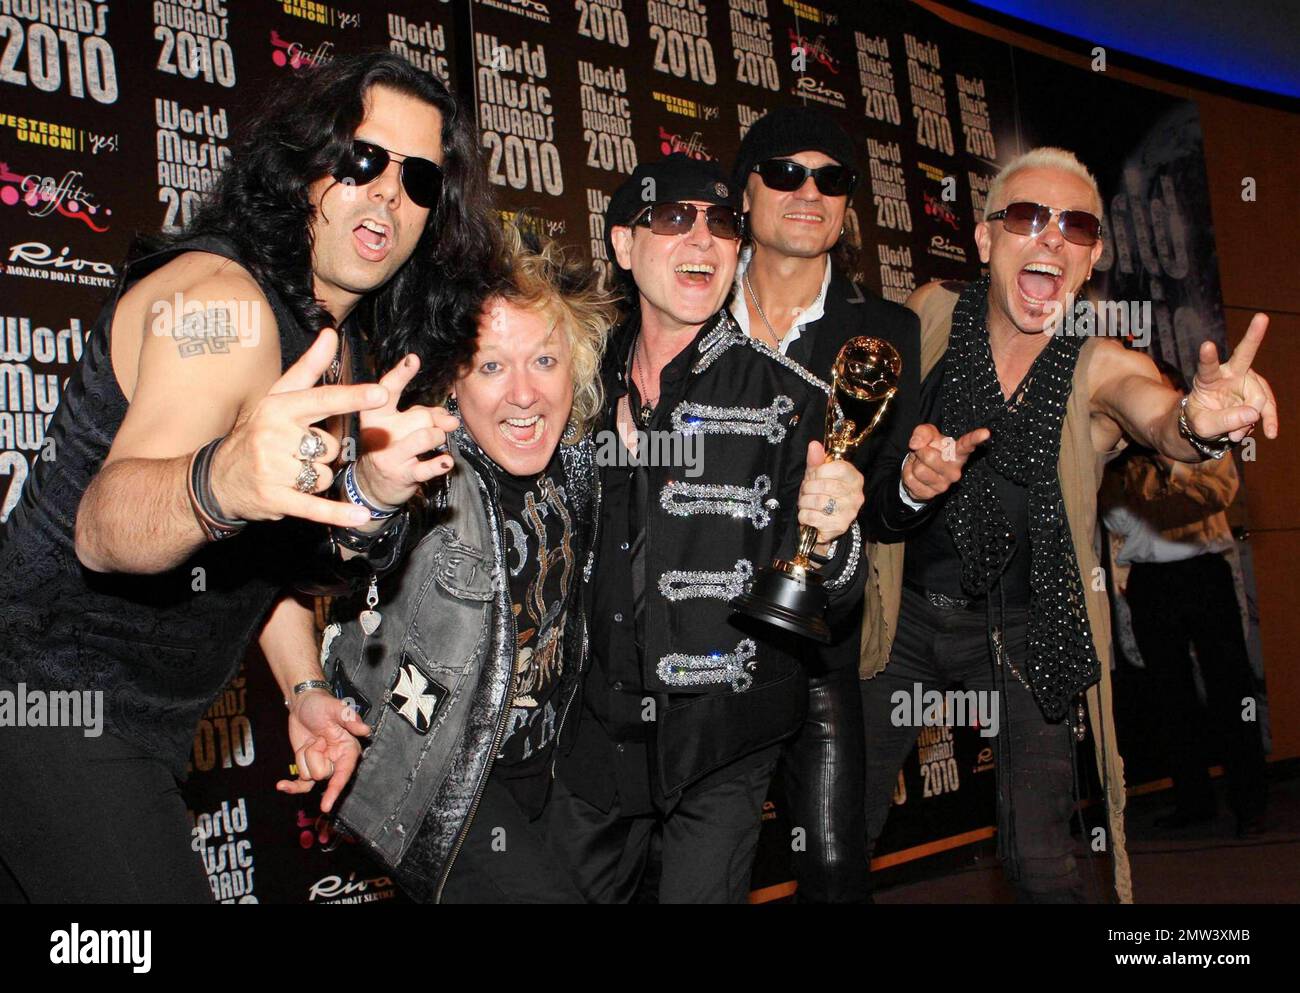 Pawel Maciwoda, James Kottak, Klaus Meine, Matthias Jabs and Rudolf Schenker of the German rock band Scorpions pose with their award at the Sporting Club Monte-Carlo after the annual World Music Awards 2010.  The award show, which was founded in 1989 to honor international recording artists based on worldwide sales figures, was hosted by actresses Michelle Rodriguez and Hayden Panettiere.  Musicians who performed at the event included Jennifer Lopez, Akon, 50 Cent and Scorpions. Monte Carlo, Monaco. 05/18/10.   . Stock Photo